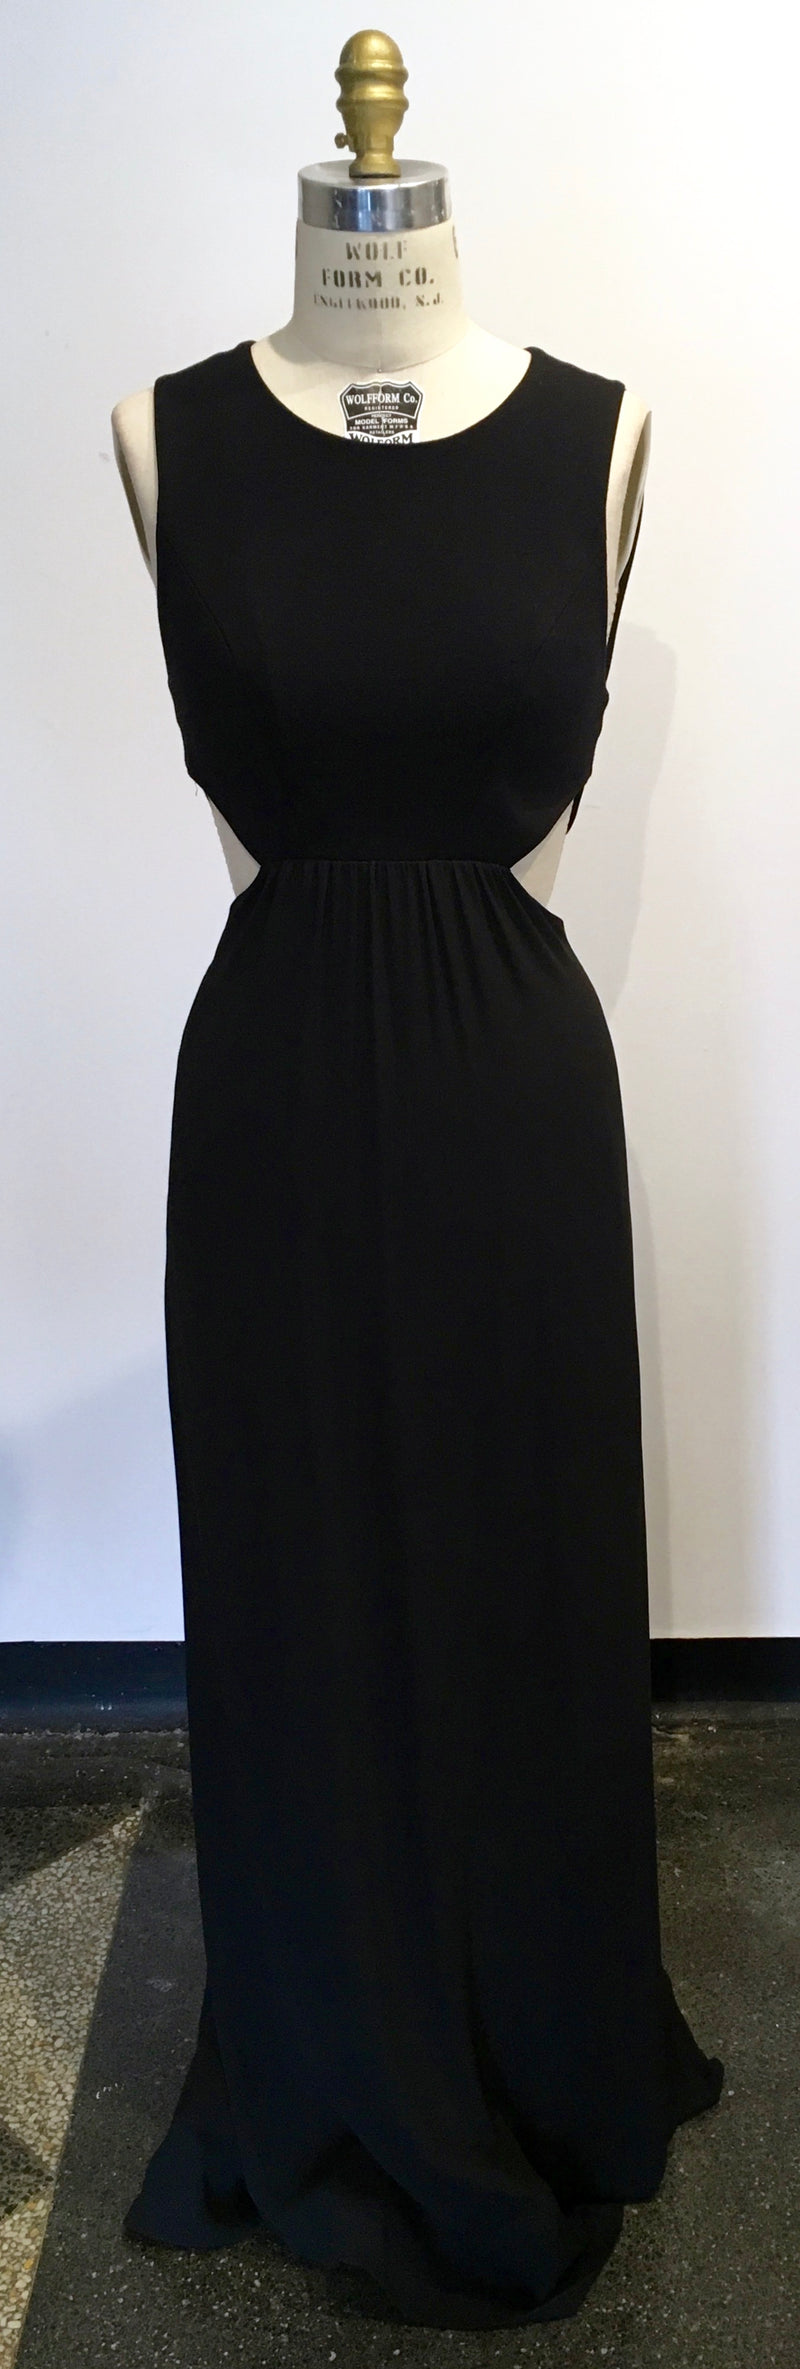 BCBG black crepe/chiffon gown w/ cutout waist and cage back, 8